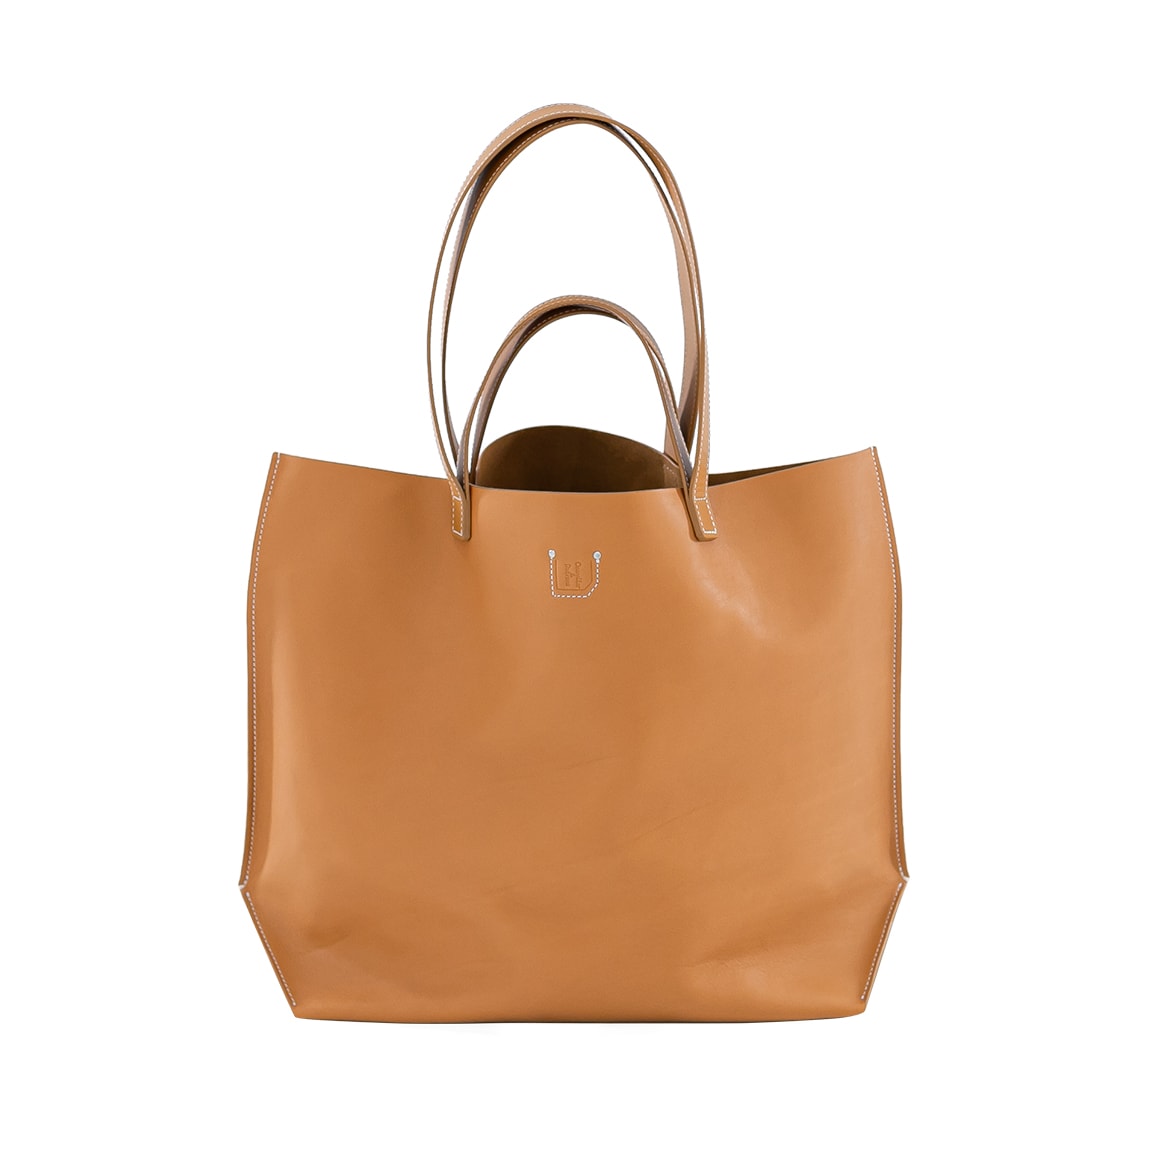 Double handles tote bag/Camel ¥96,800